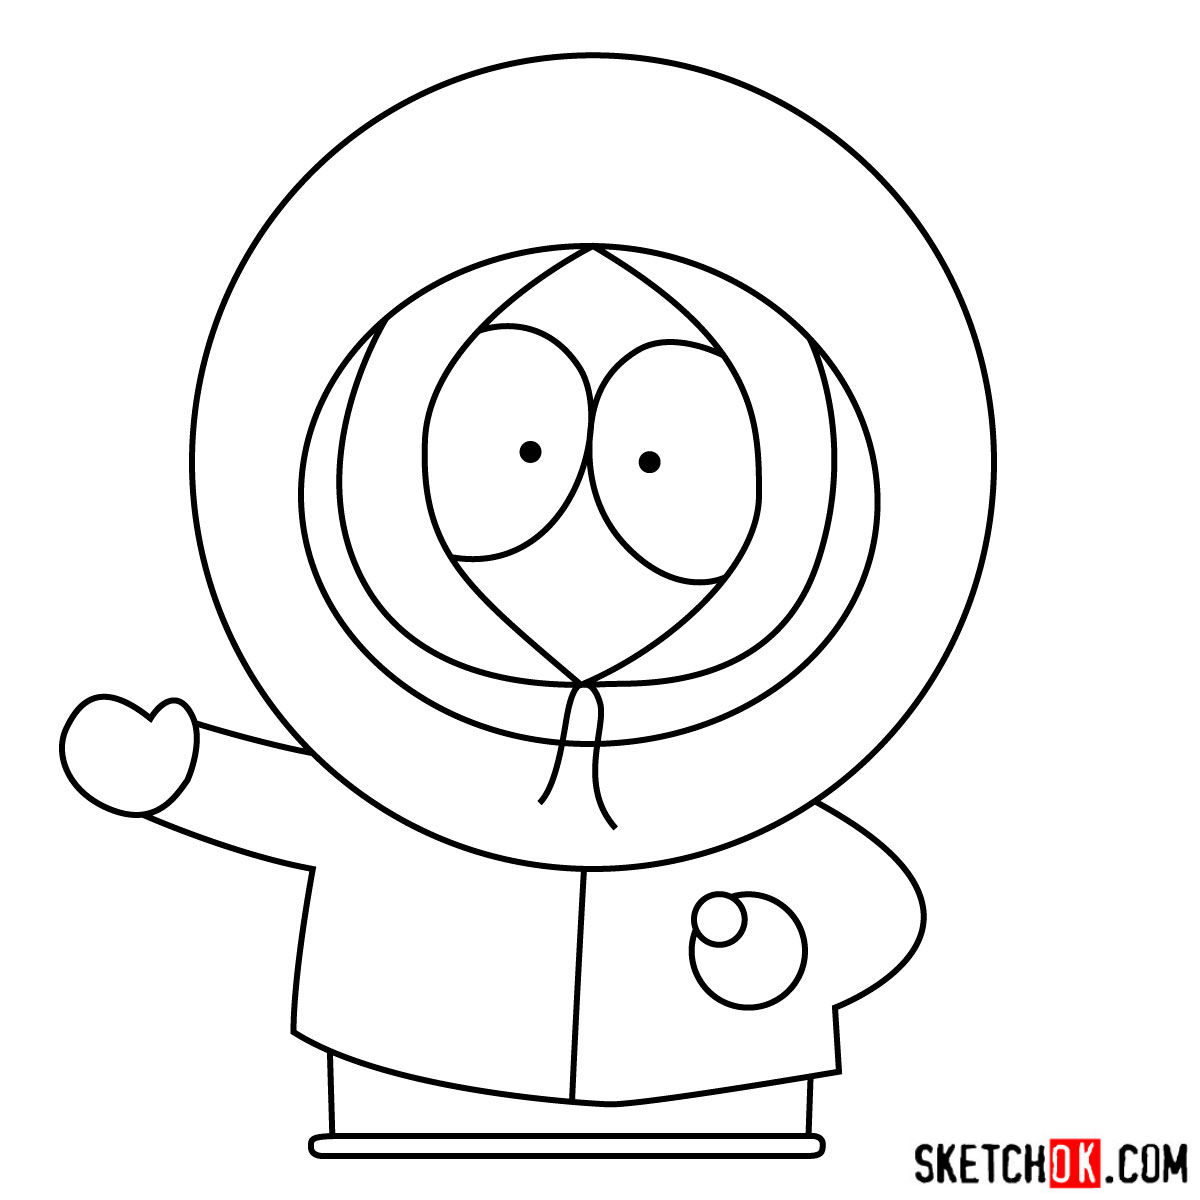 Learn how to draw Kenny McCormick from South Park - SketchOk